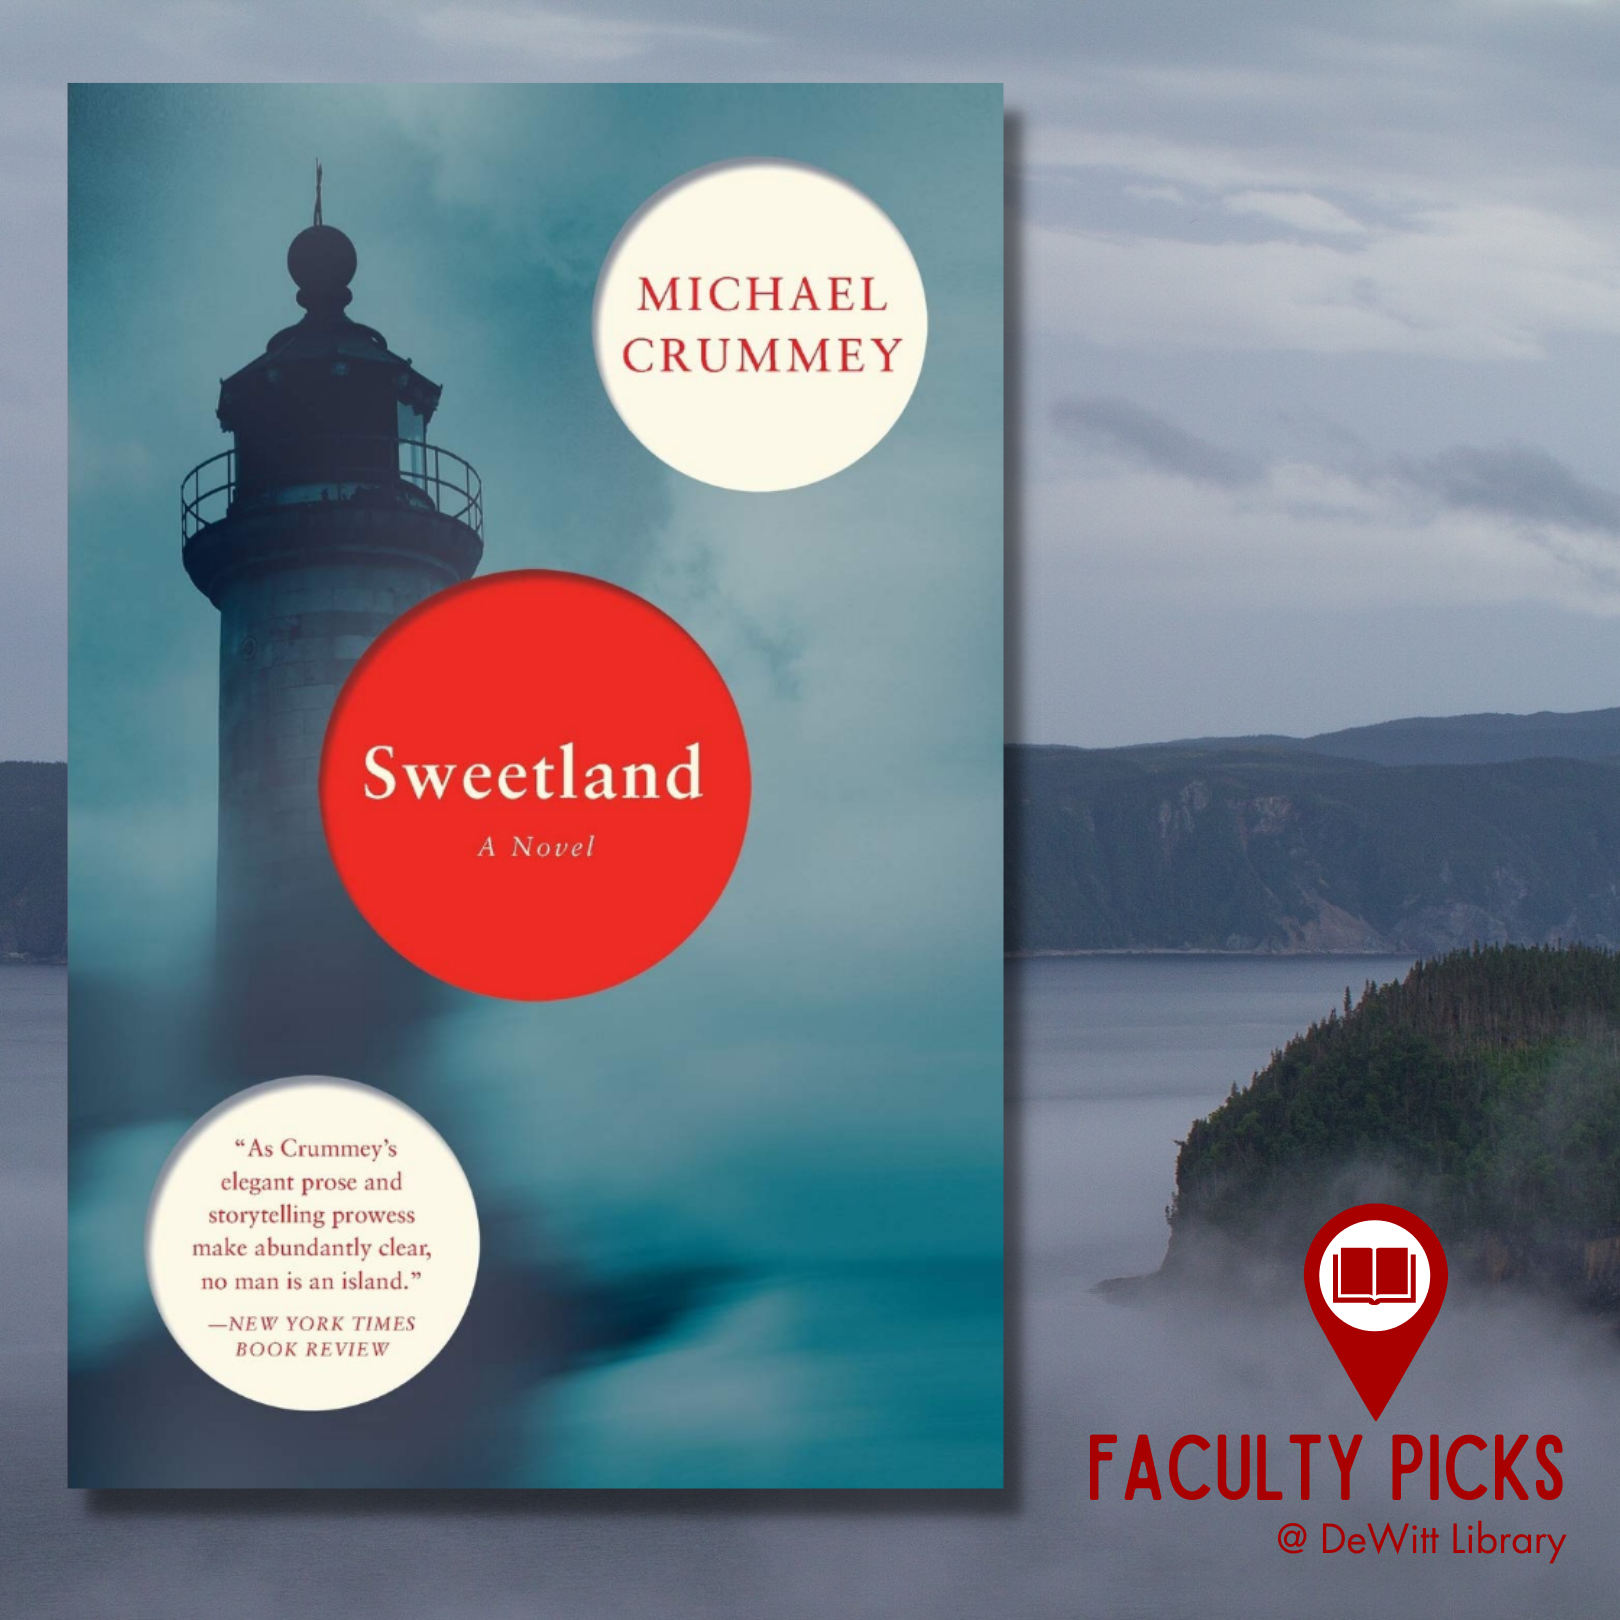 Faculty Picks at DeWitt Library - Sweetland: a novel by Michael Crummey